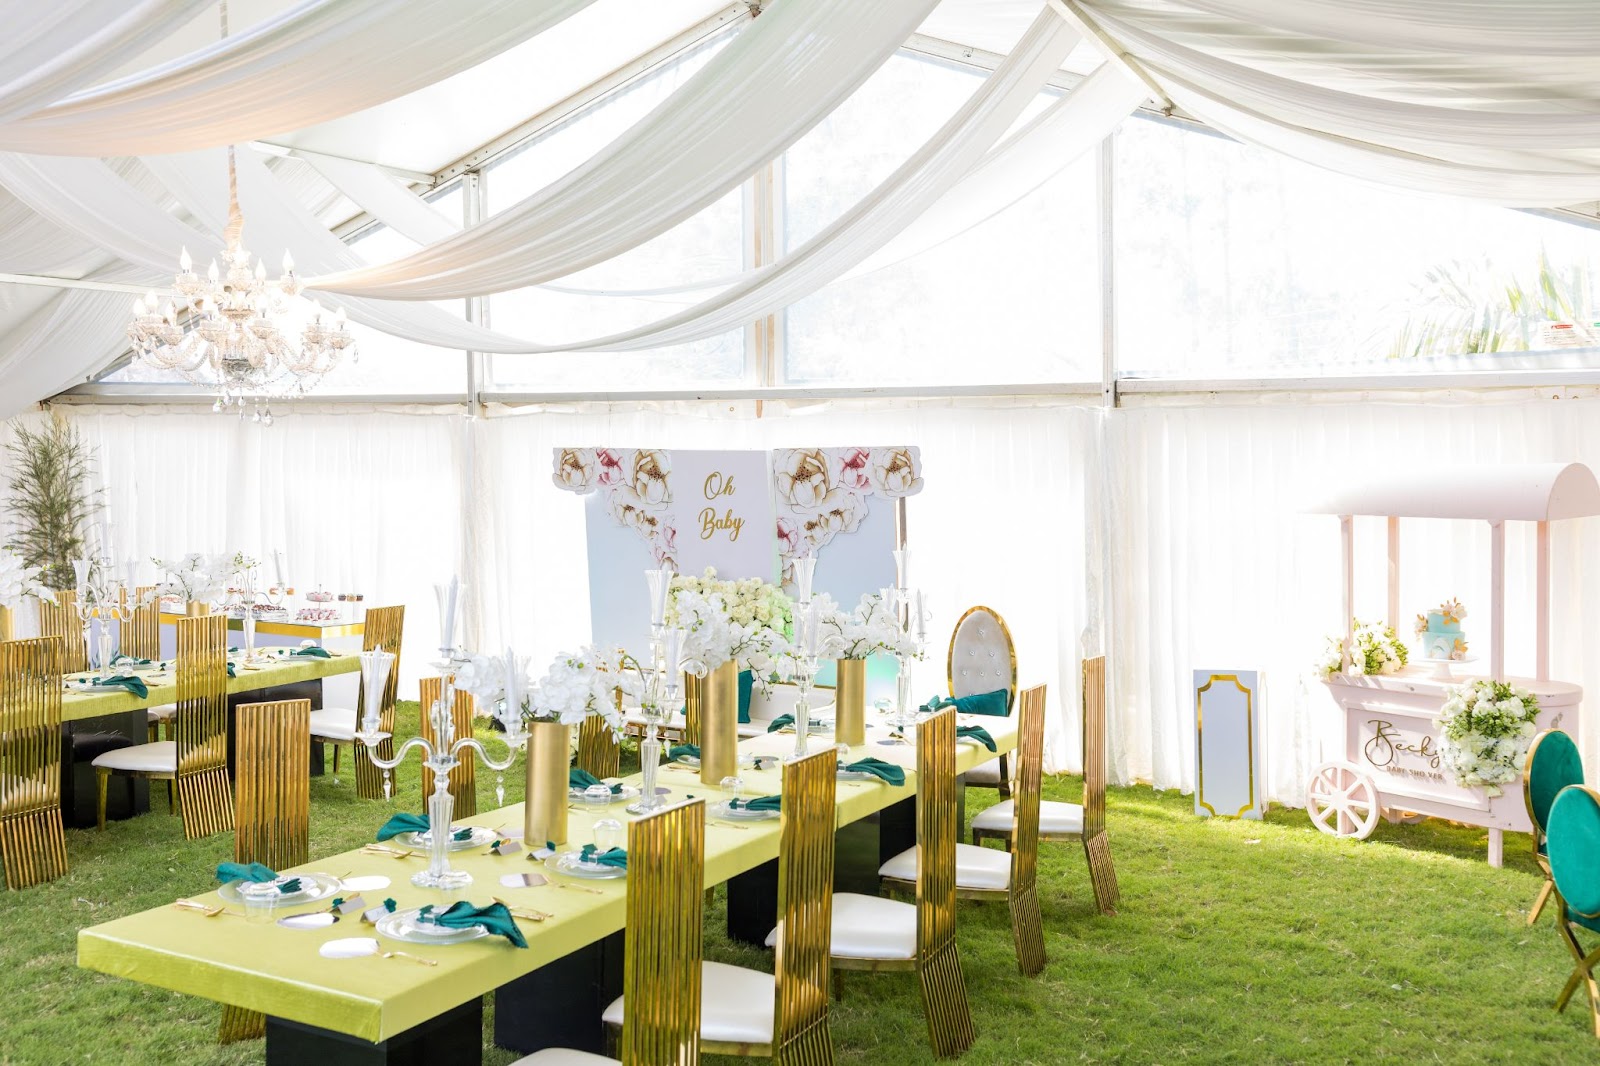 Outdoor venue - What to Wear to a Baby Shower - Baby Journey